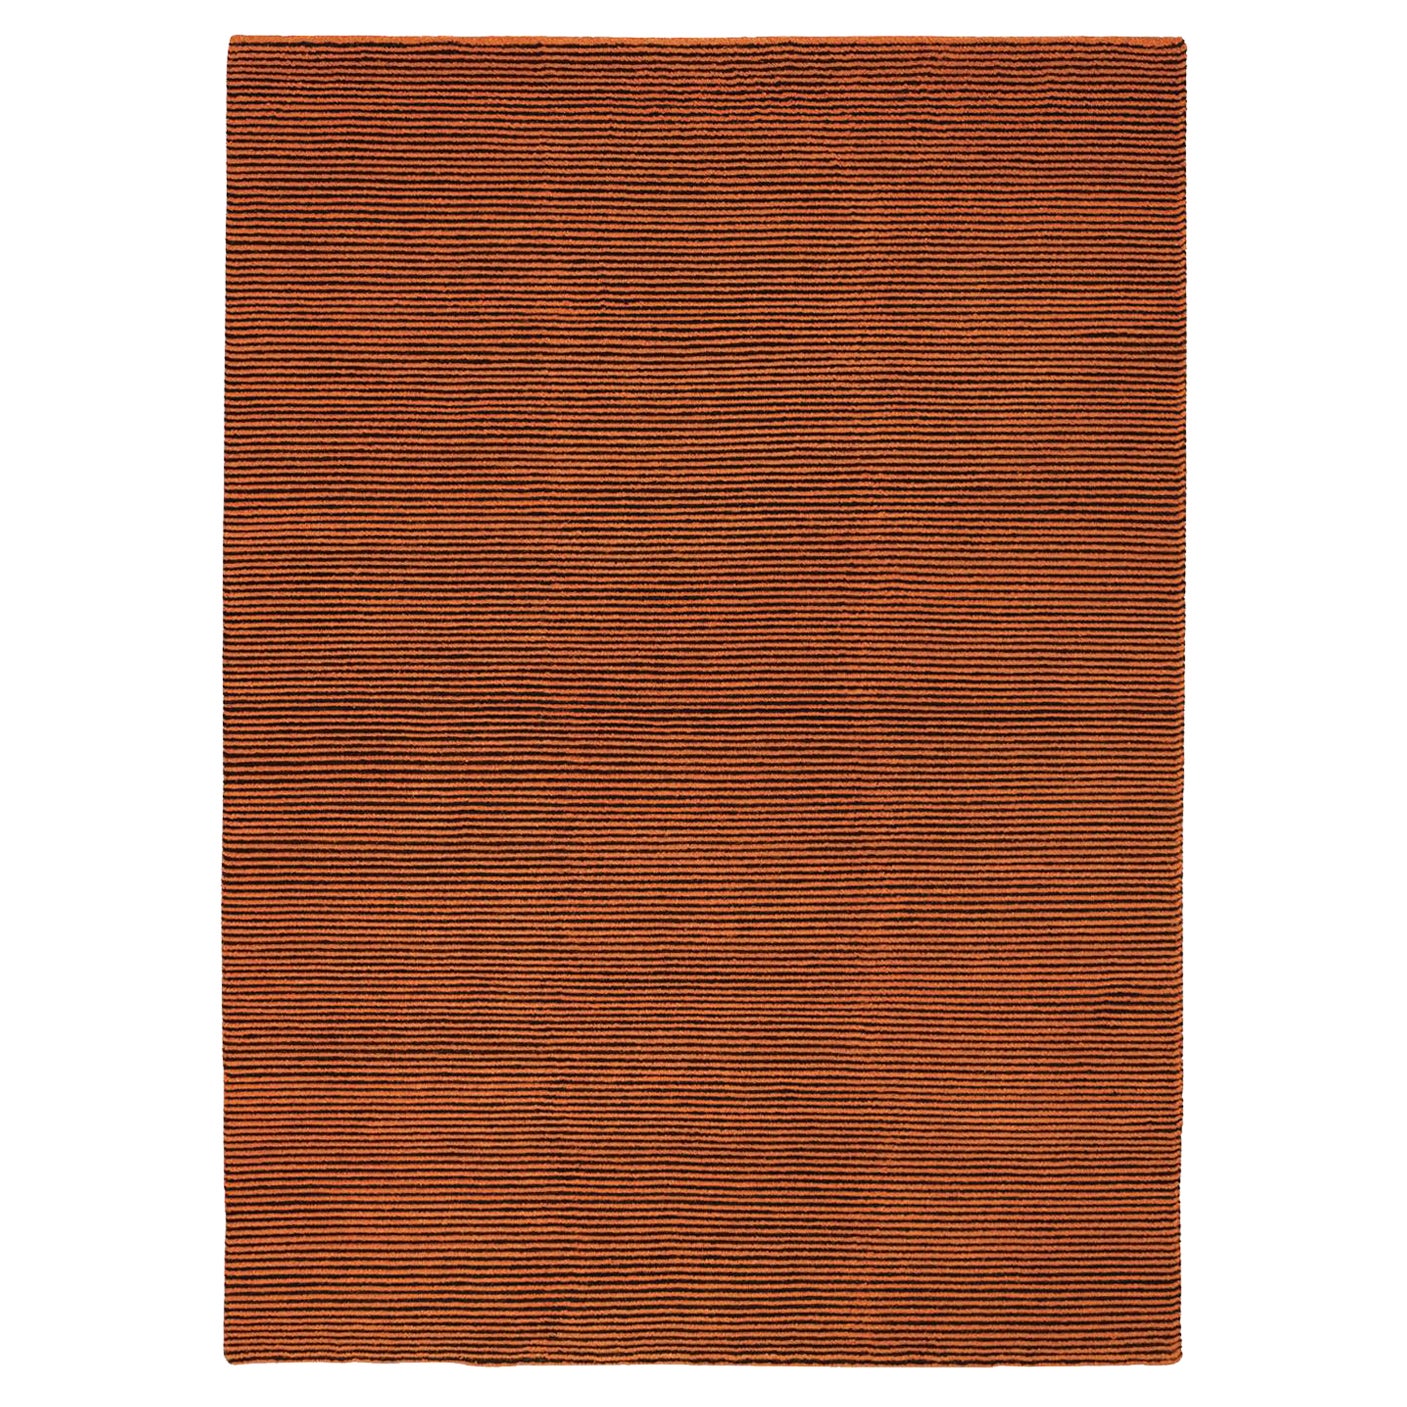 Contemporary Soft Orange Pure Wool Rug by Deanna Comellini In Stock 170x240 cm